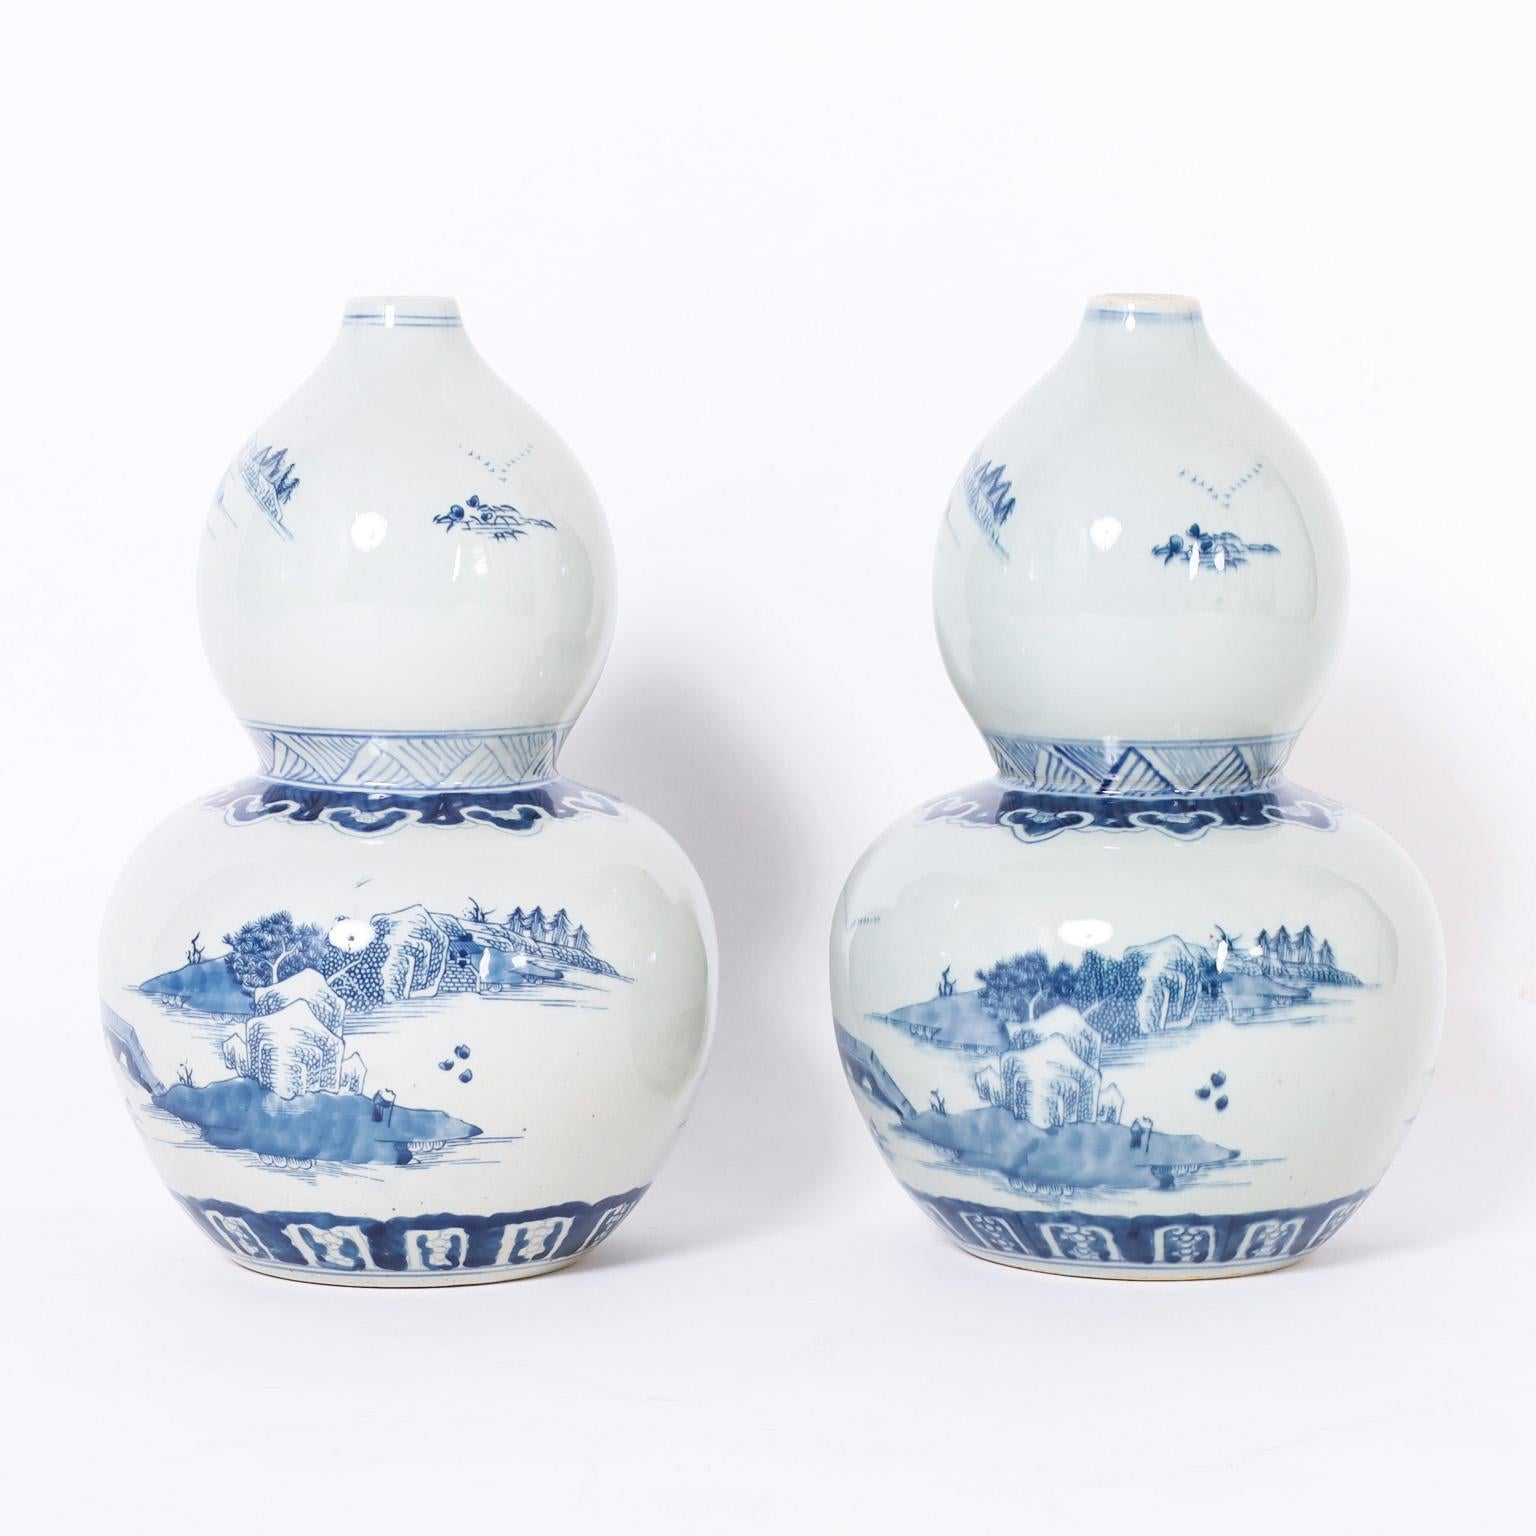 Standout pair of Chinese blue and white porcelain vases having a double gourd form, hand decorated with pagoda landscapes.